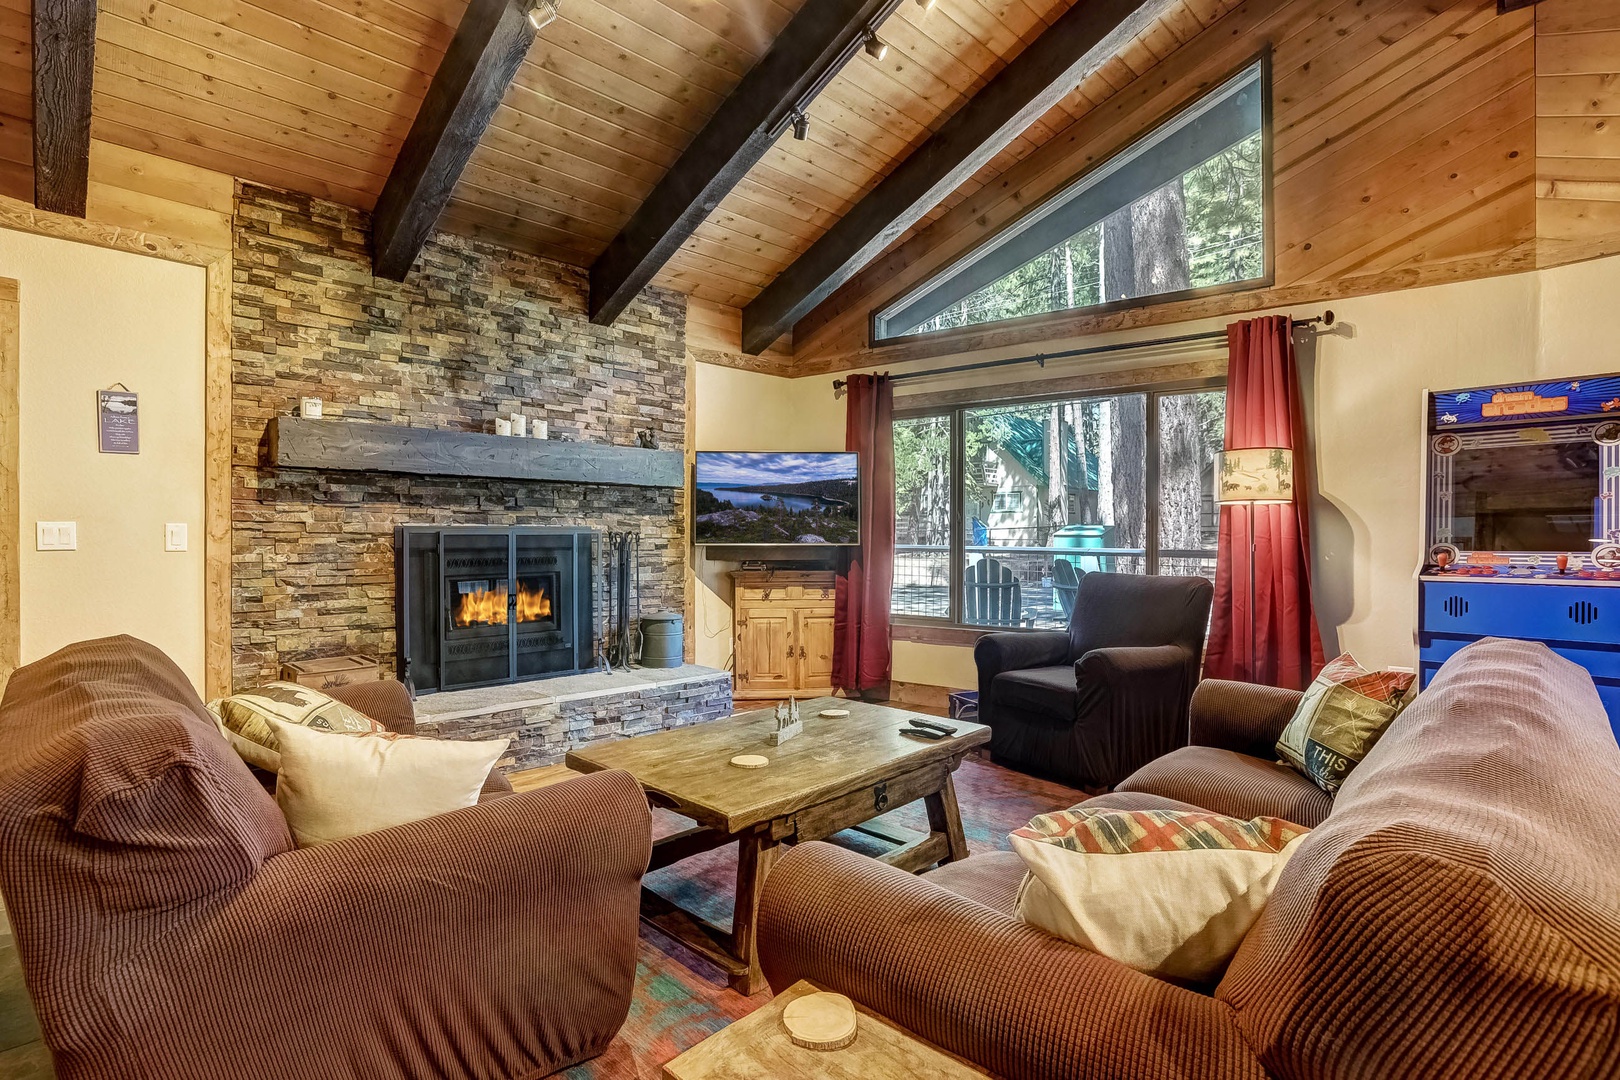 Living room with Smart TV, wood burning fireplace, backyard access and comfortable seating